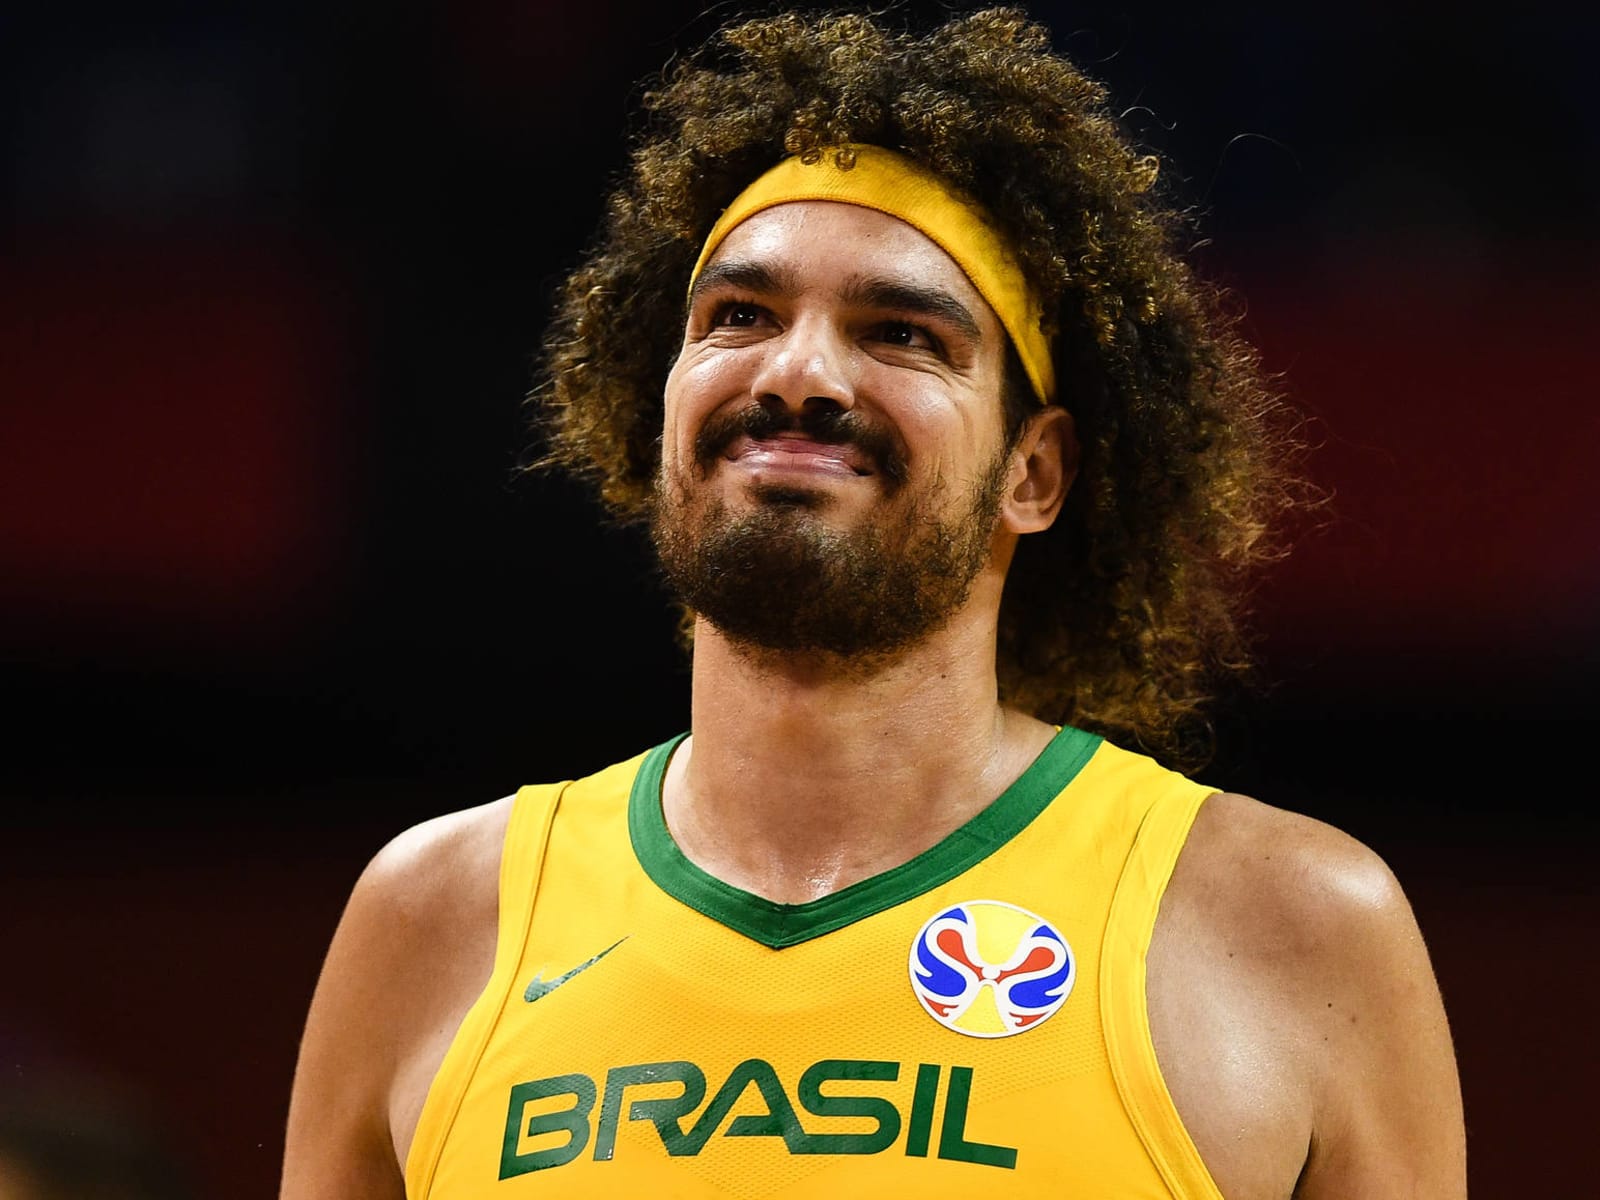 Anderson Varejao Returns For The First Time Since 2017 For The